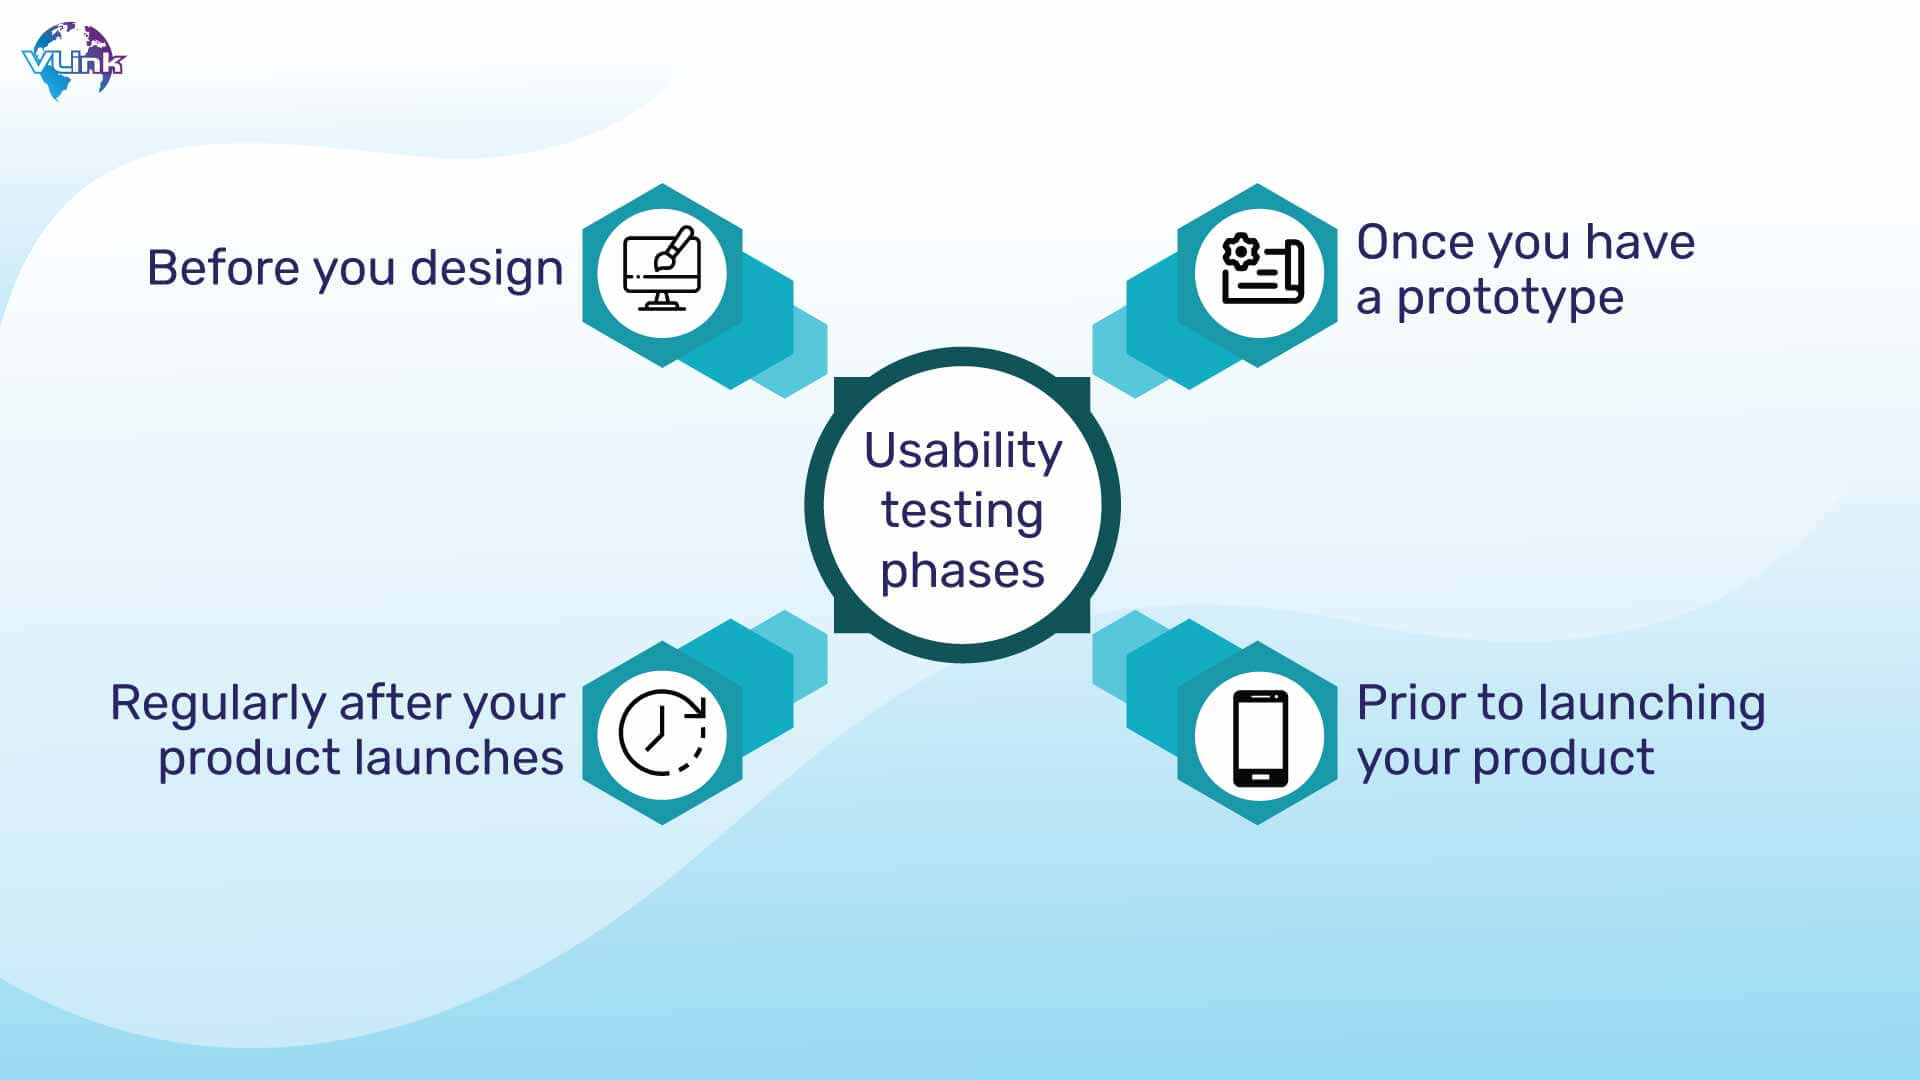 Usability testing phases